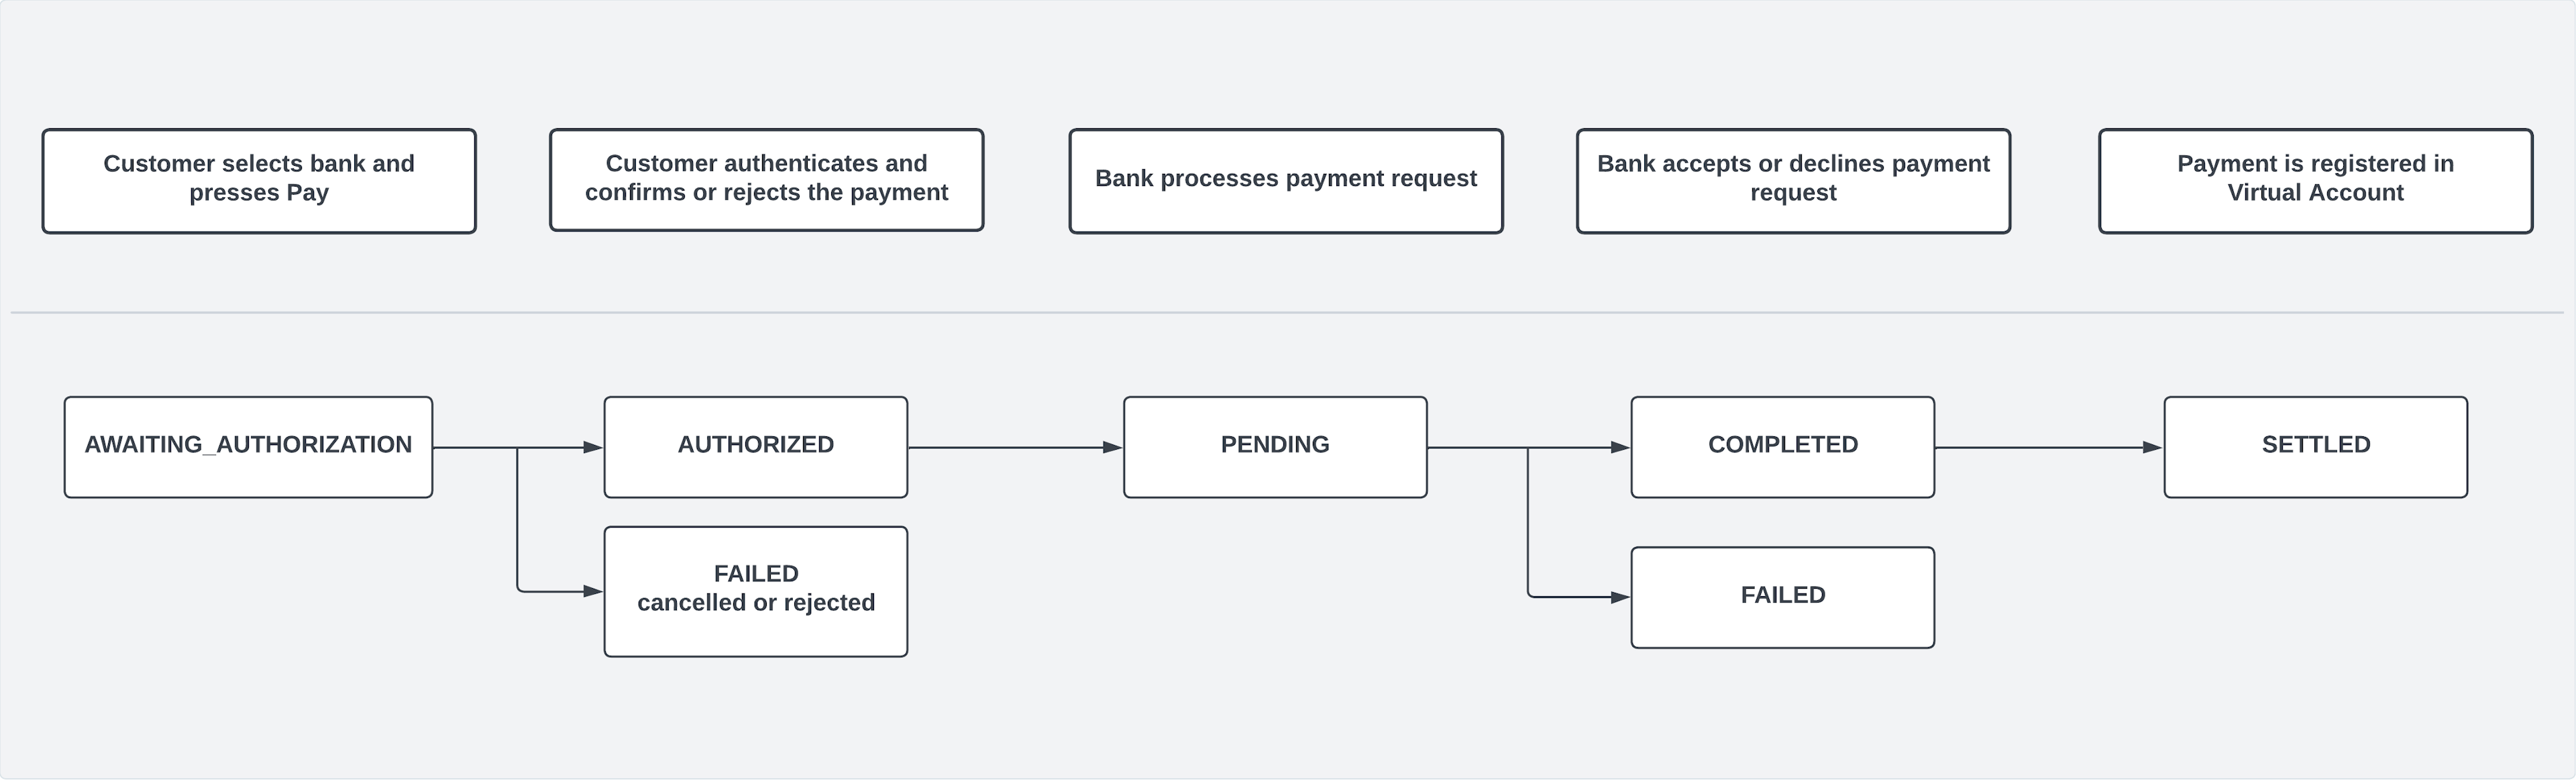 PaymentLifecycle